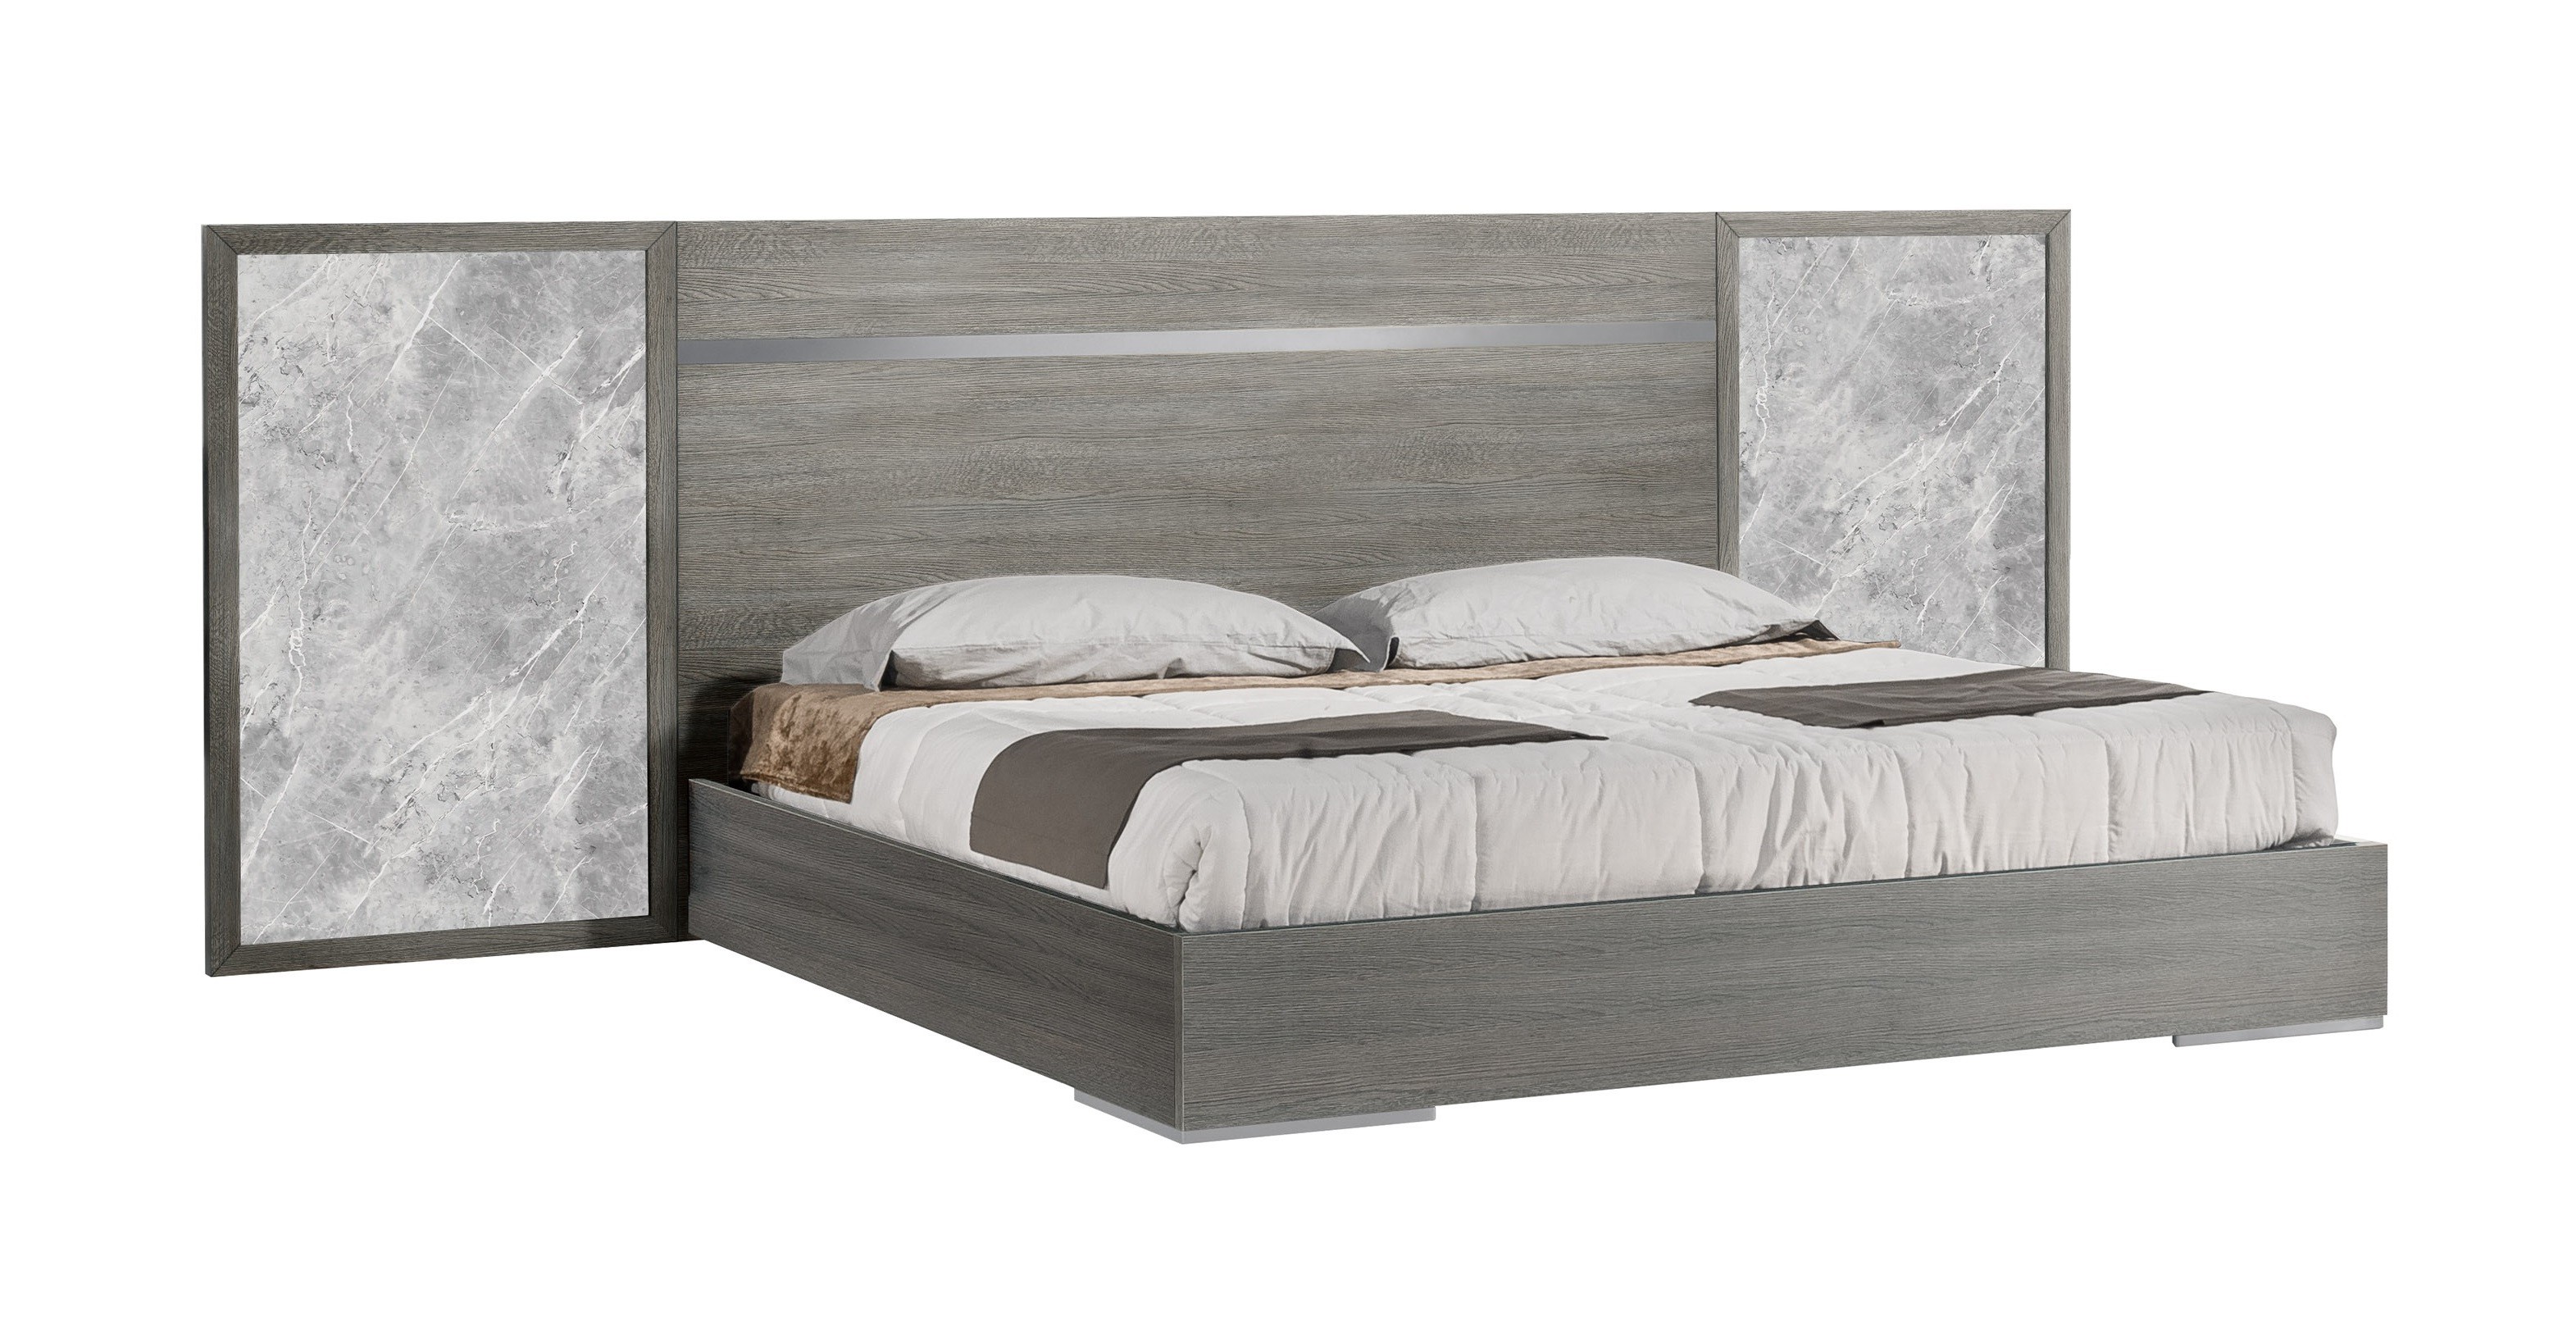 Fashionable Wood Grain Modern Design Bed Set Made in Italy